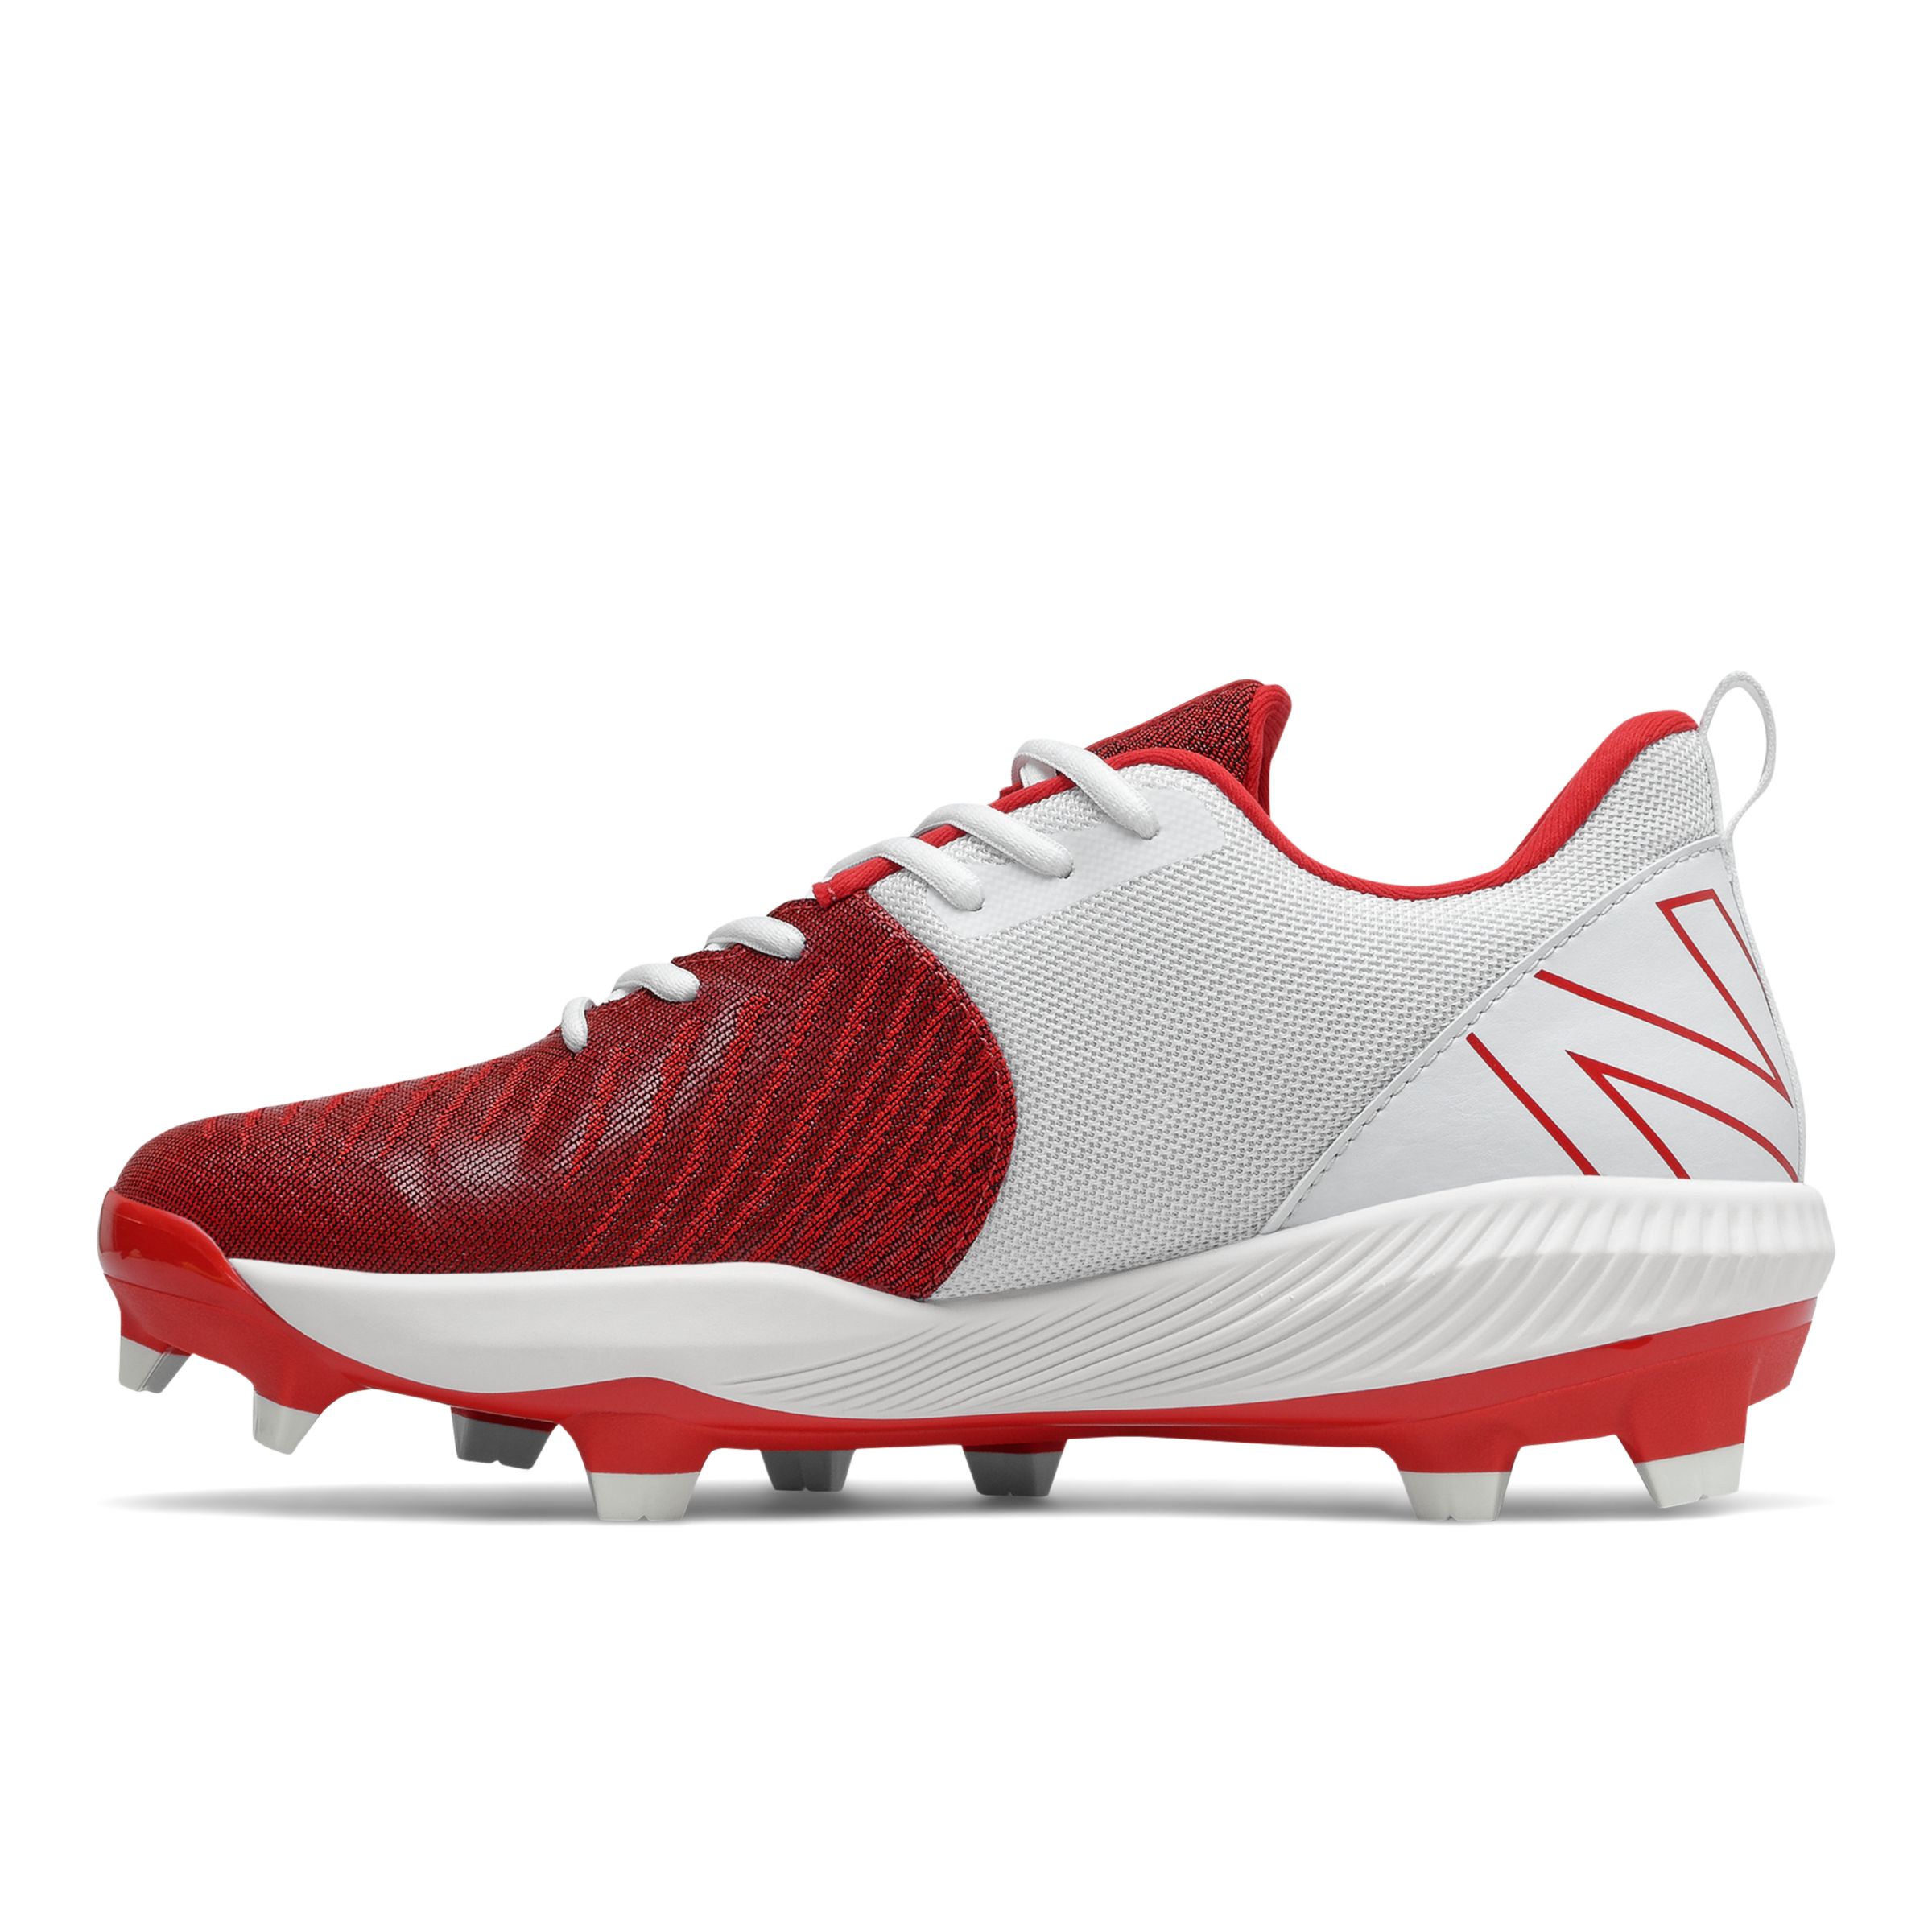 FuelCell 4040 v6 Molded Cleat - Men's 4040 - Baseball, - NB Team Sports ...